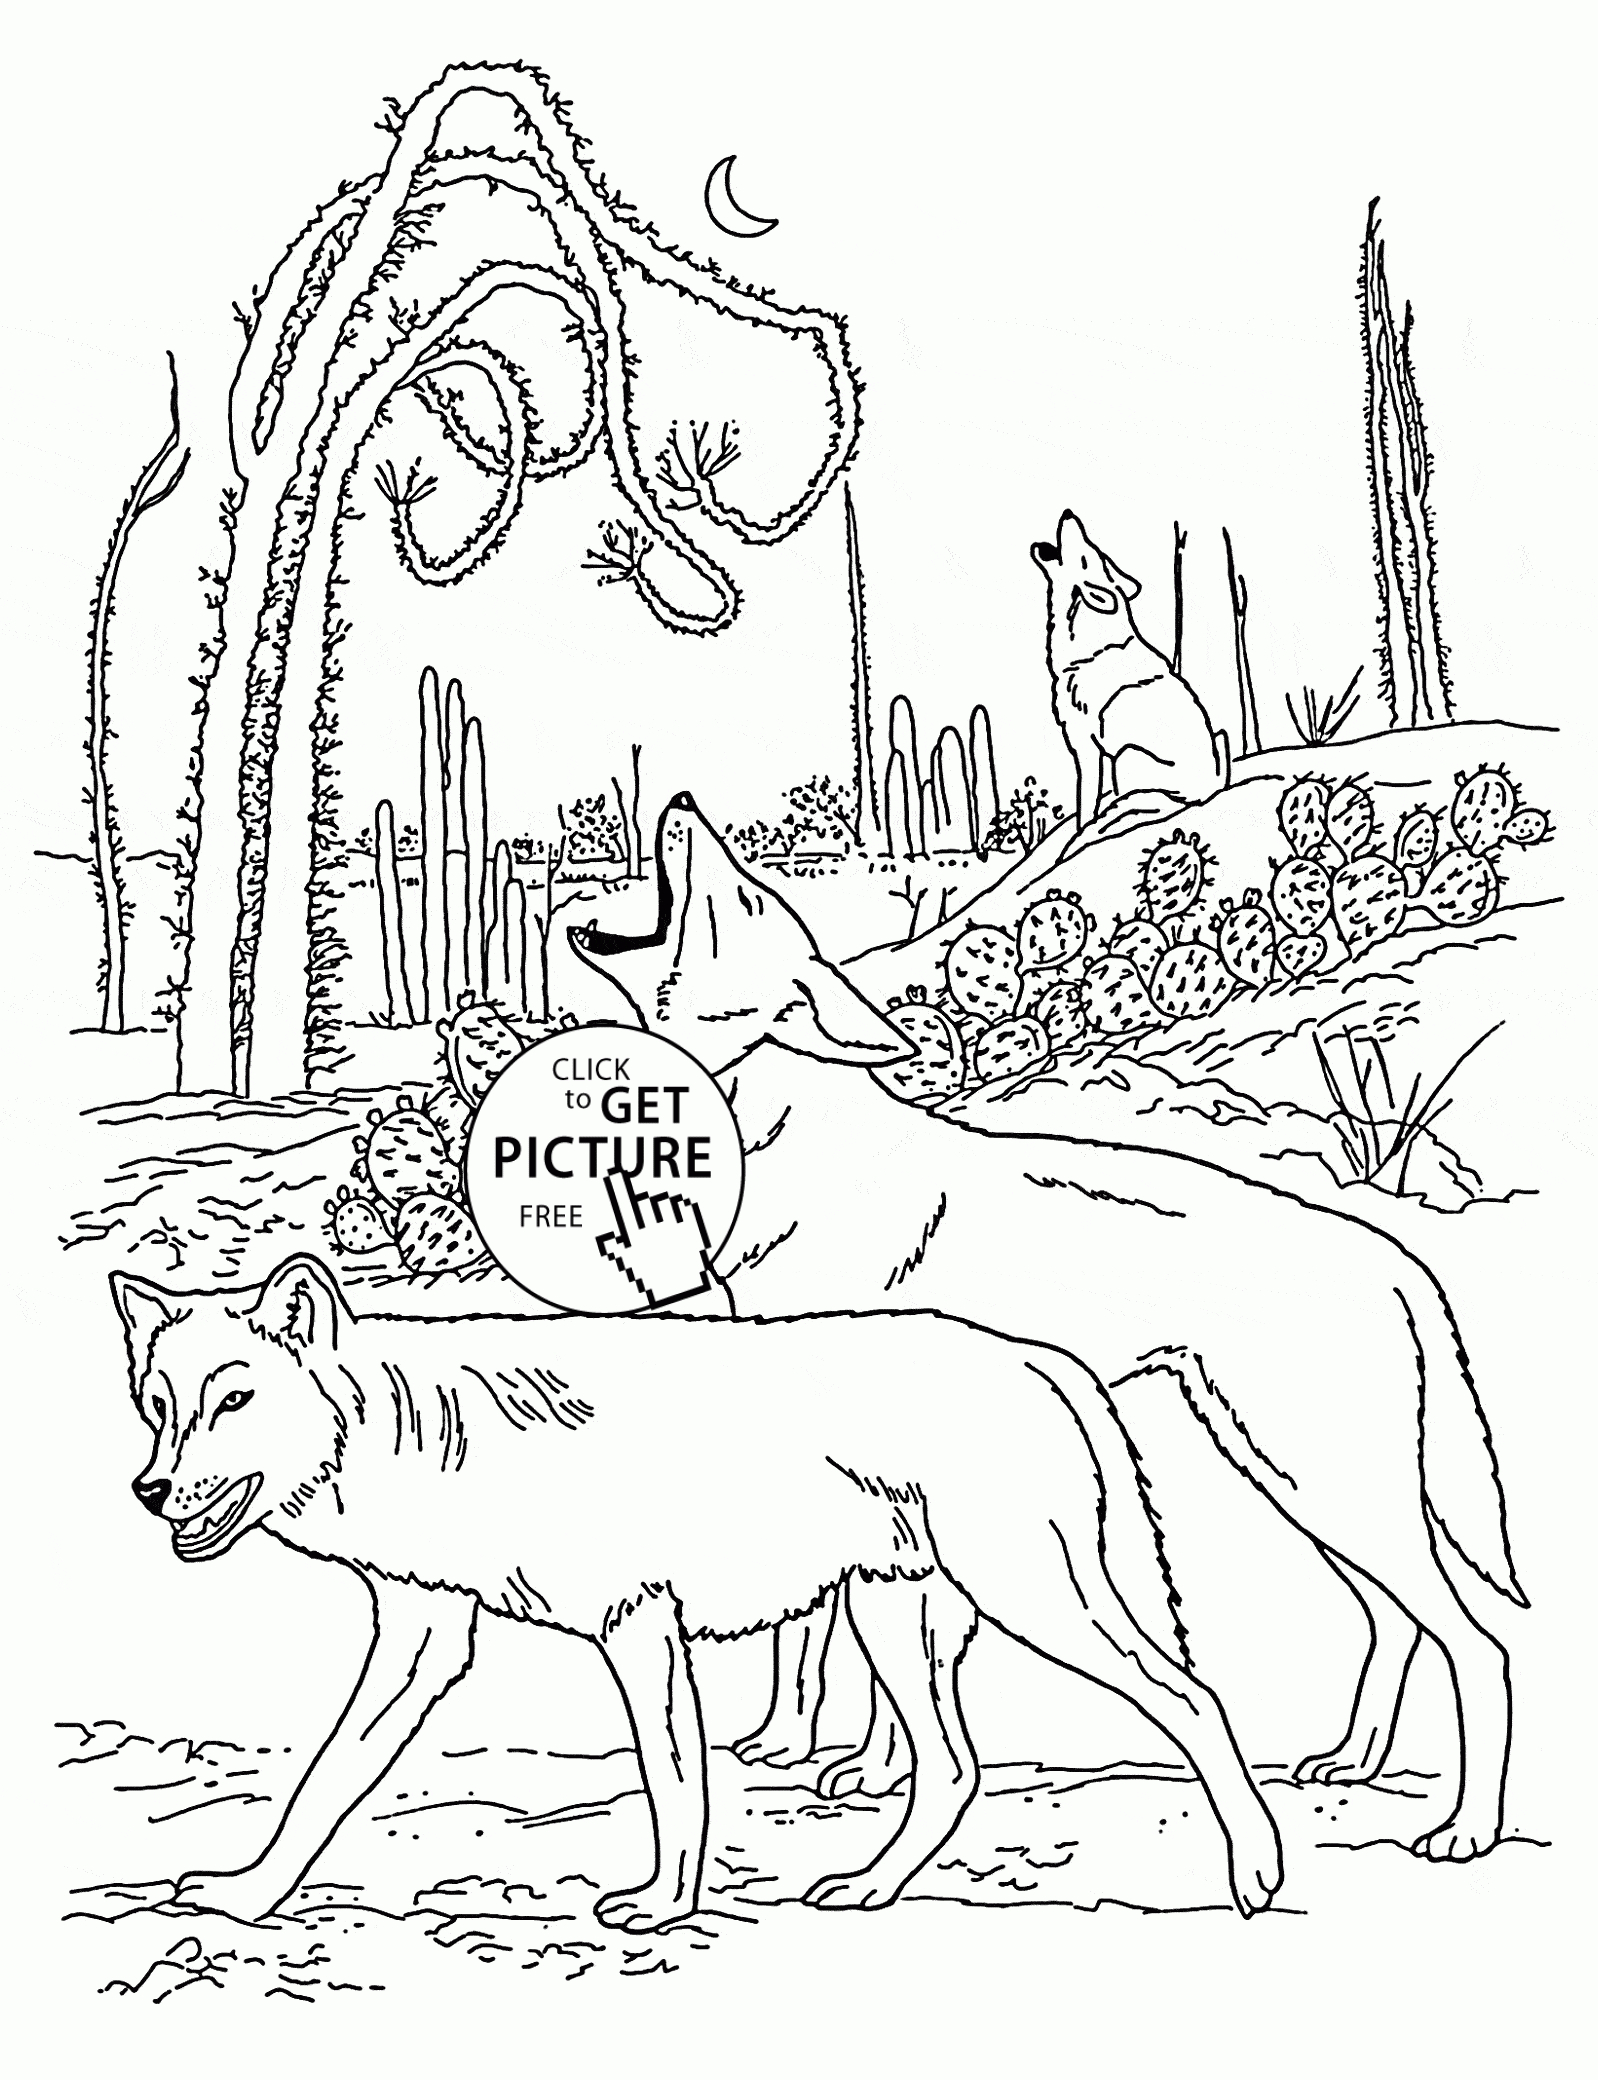 Coloring Ideas : Wild Animalring Sheets Image Inspirations Coyotes - Free Printable Wild Animal Coloring Pages